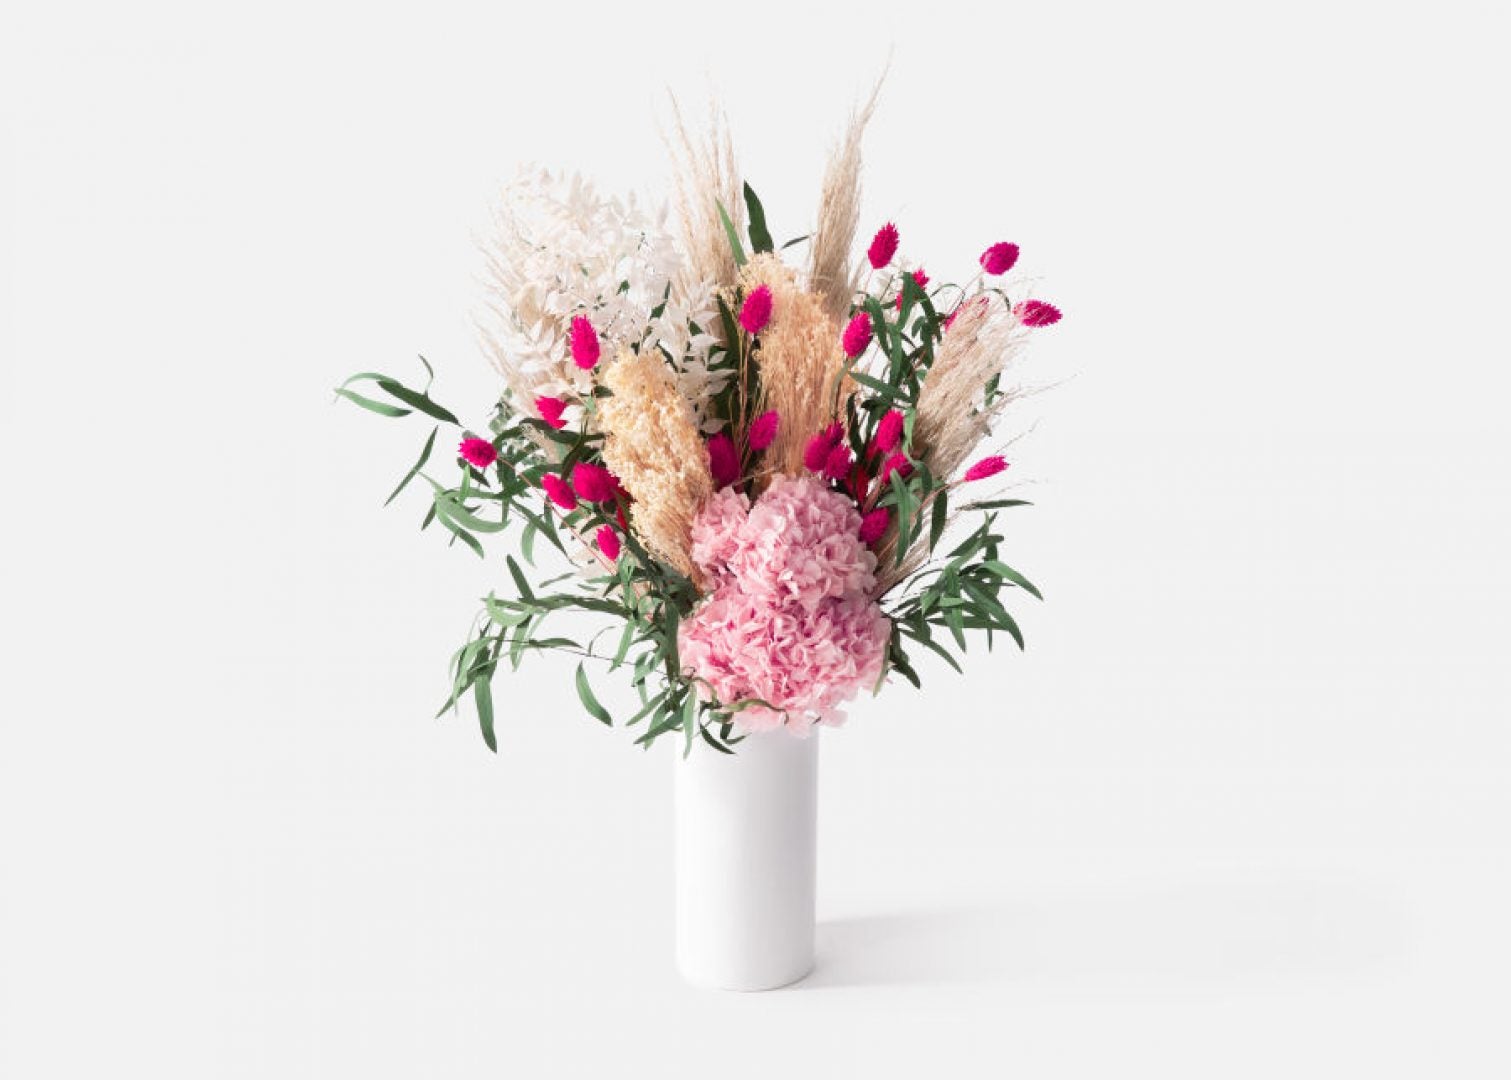 17 Showstopping Mother's Day Floral Arrangements For Every Type Of Mom